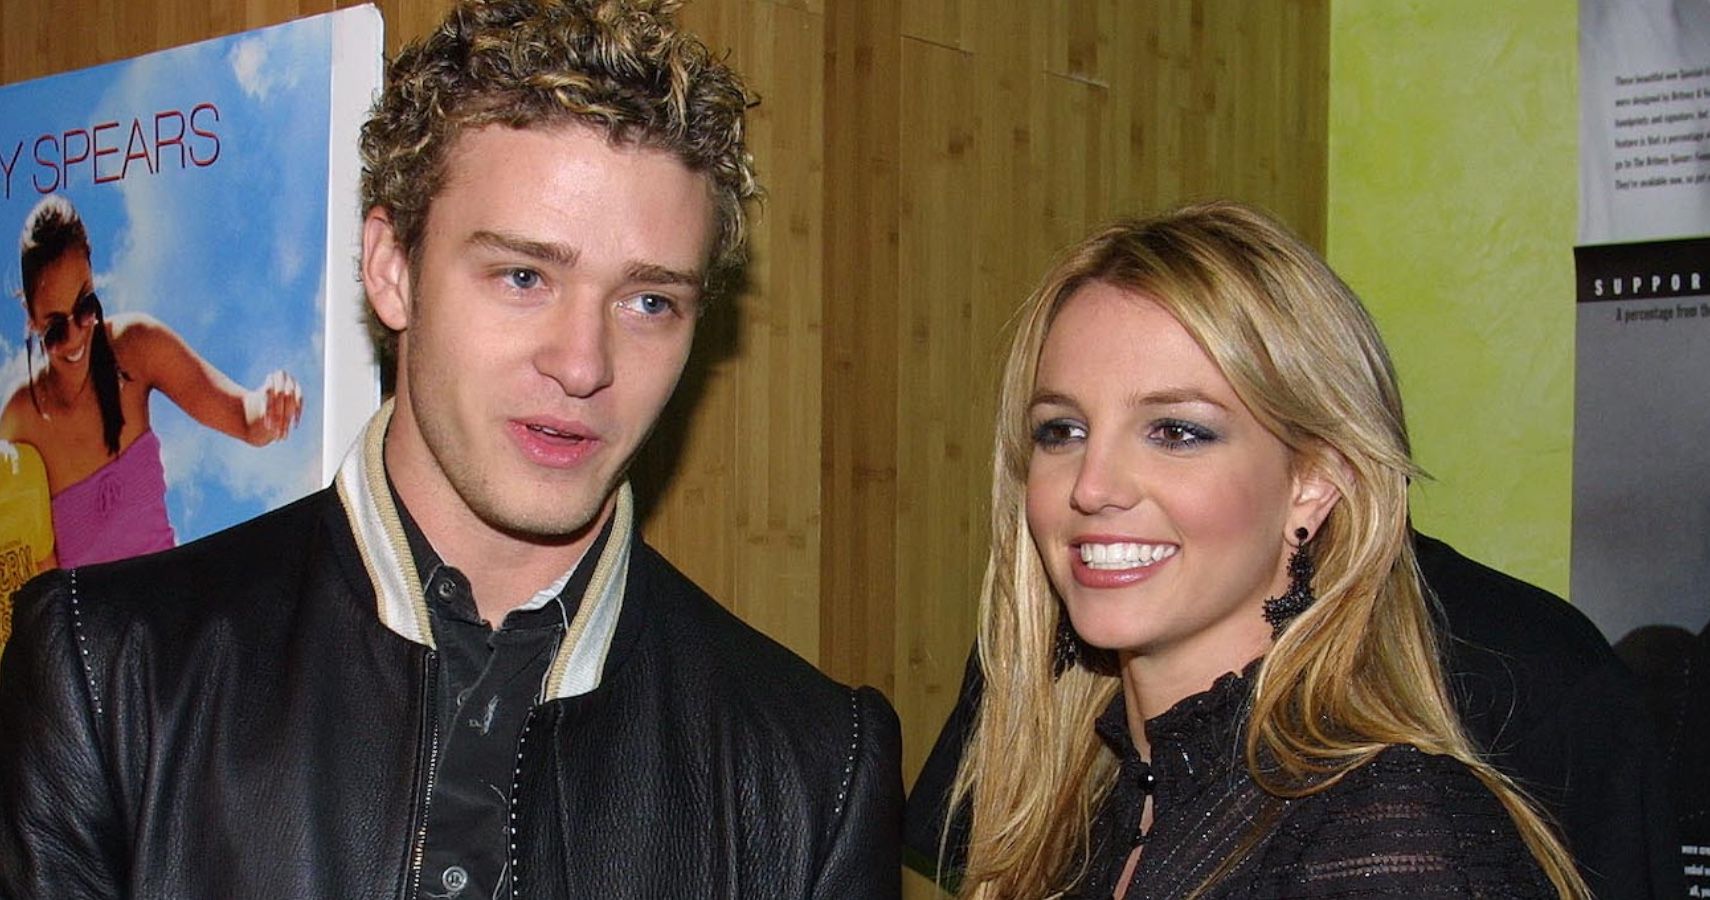 Britney Spears and Justin Timberlake at movie premiere 